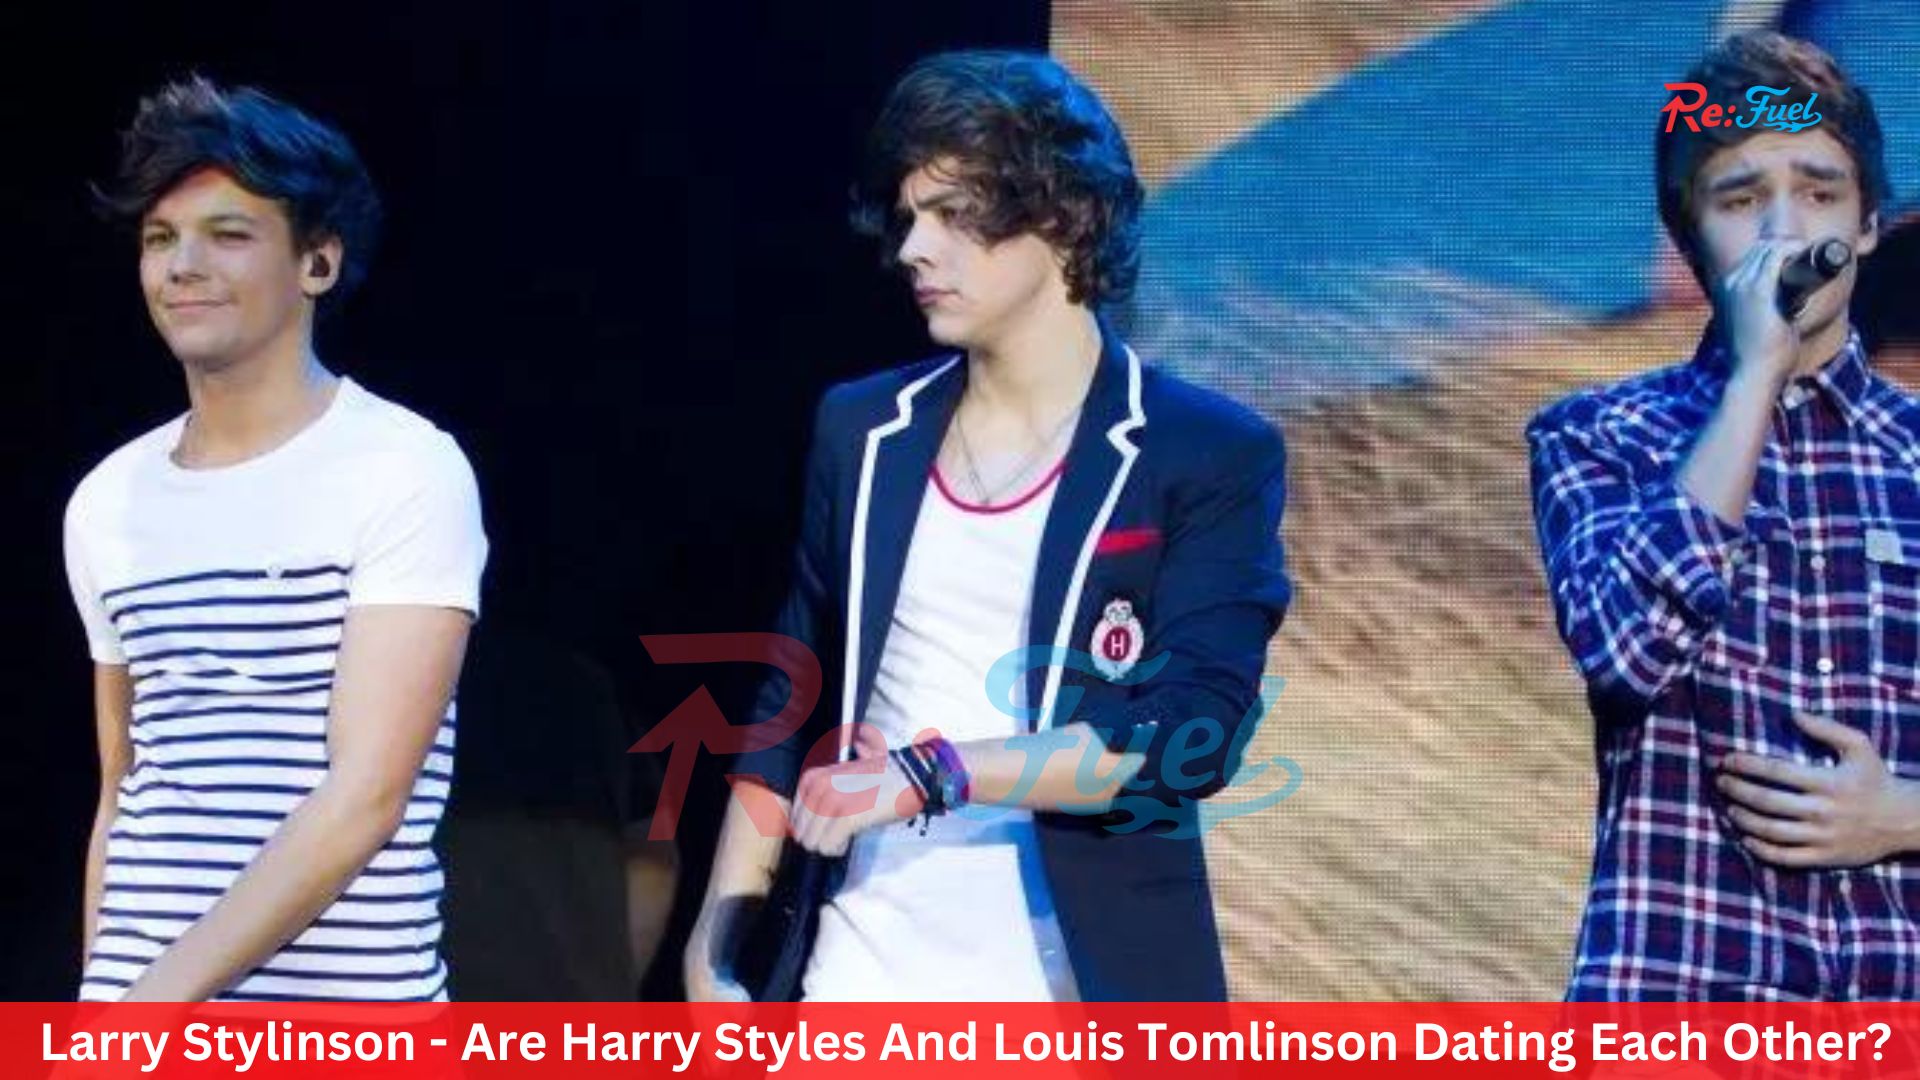 Larry Stylinson - Are Harry Styles And Louis Tomlinson Dating Each Other?